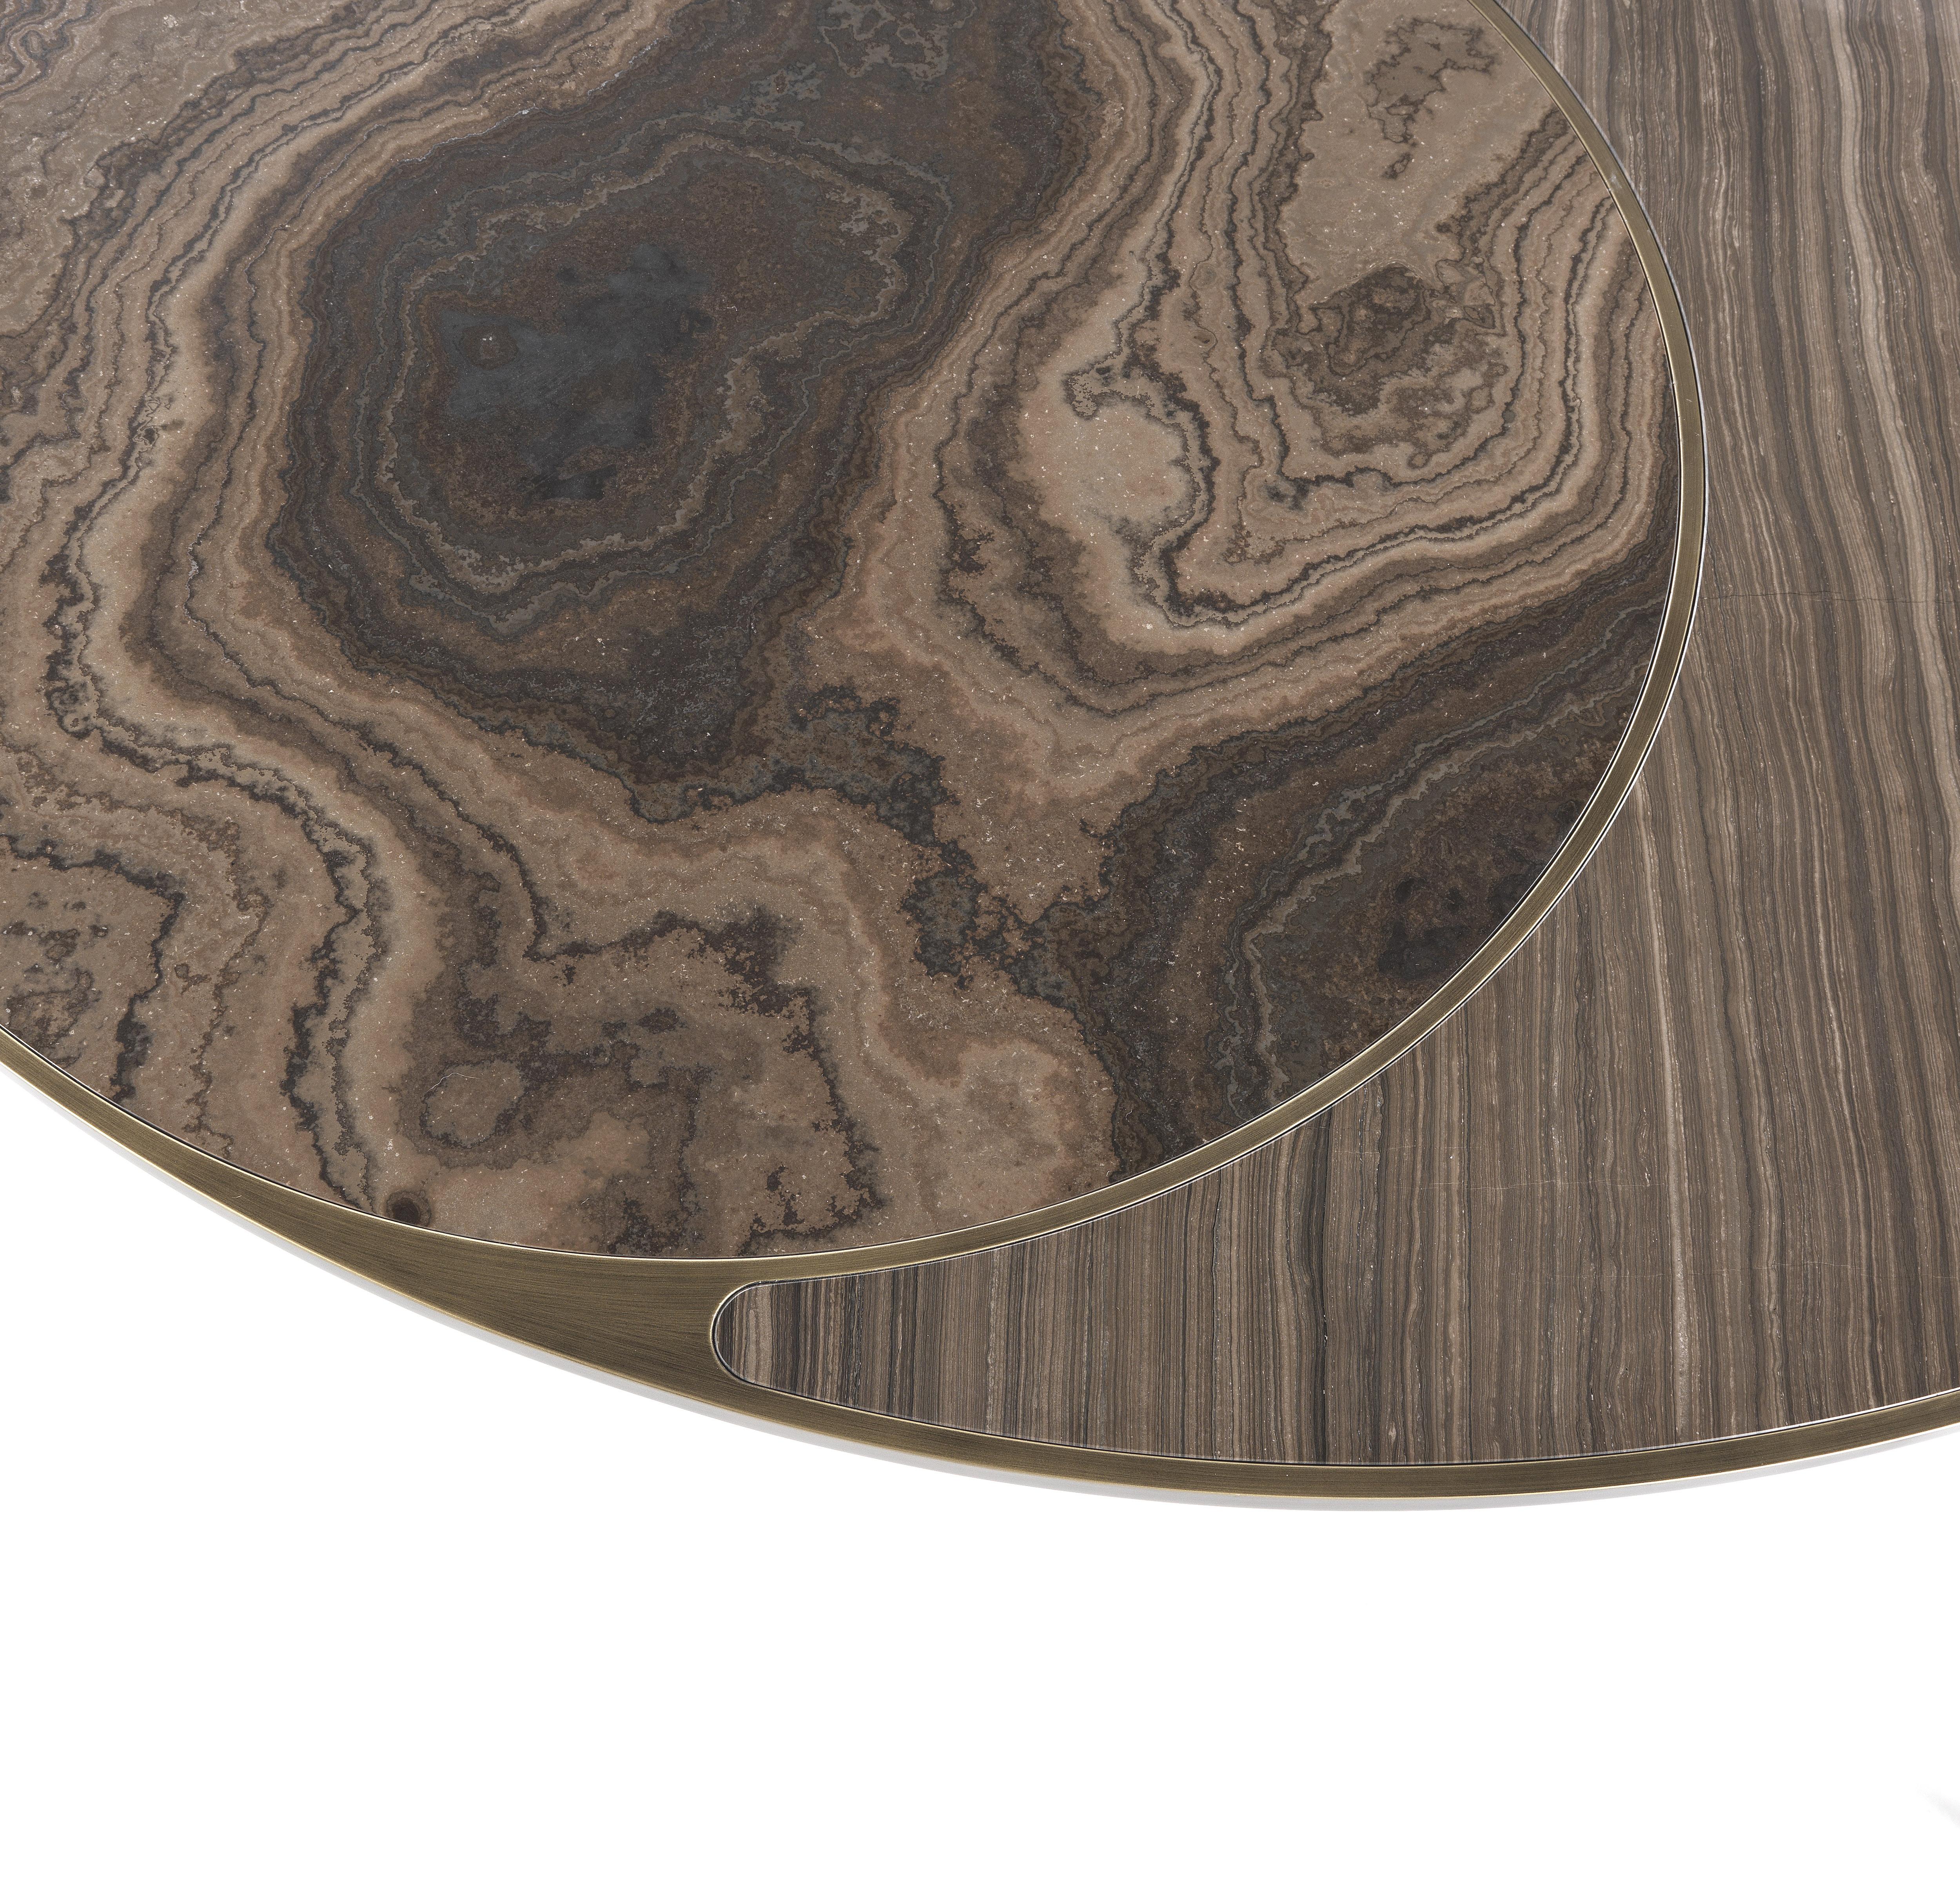 Italian 21st Century Dalí Round Dining Table in Bronze and Marble by Etro Home Interiors For Sale